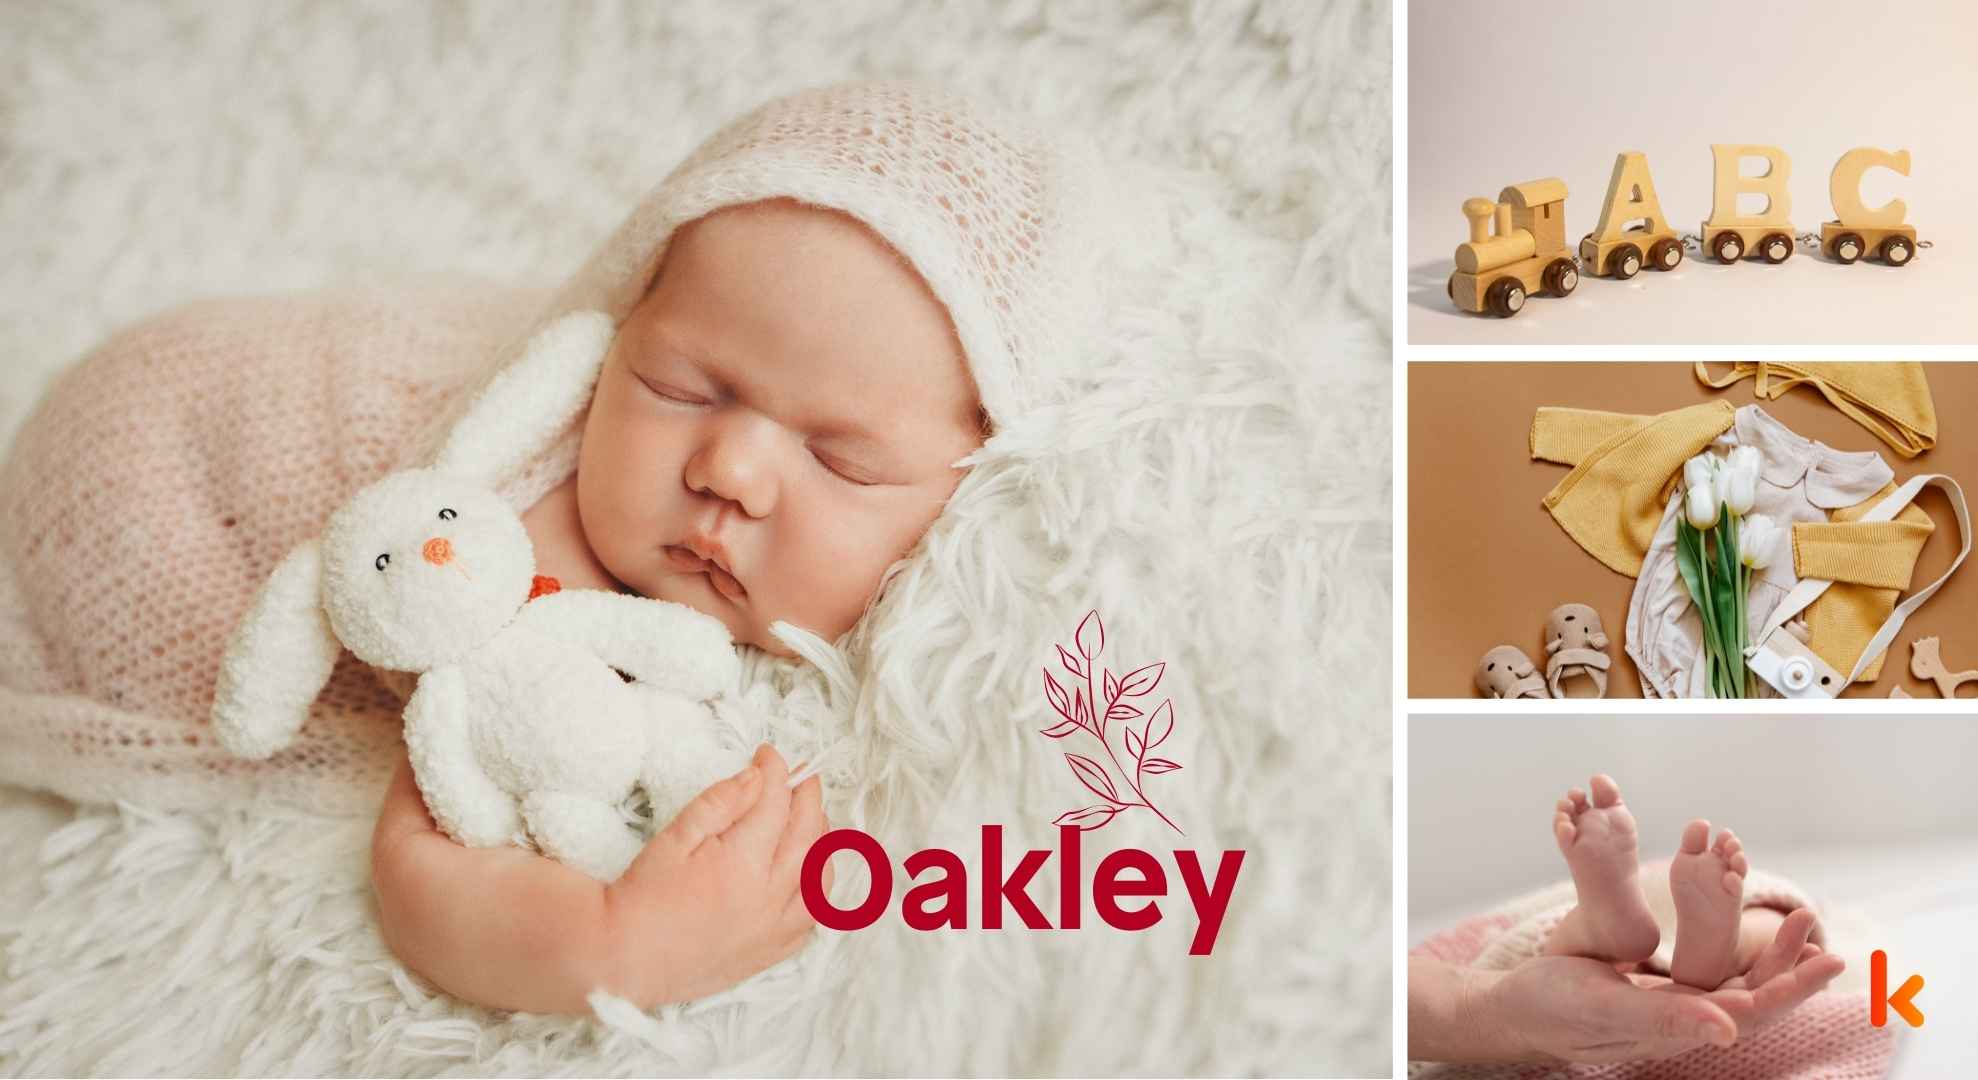 Meaning of the name Oakley